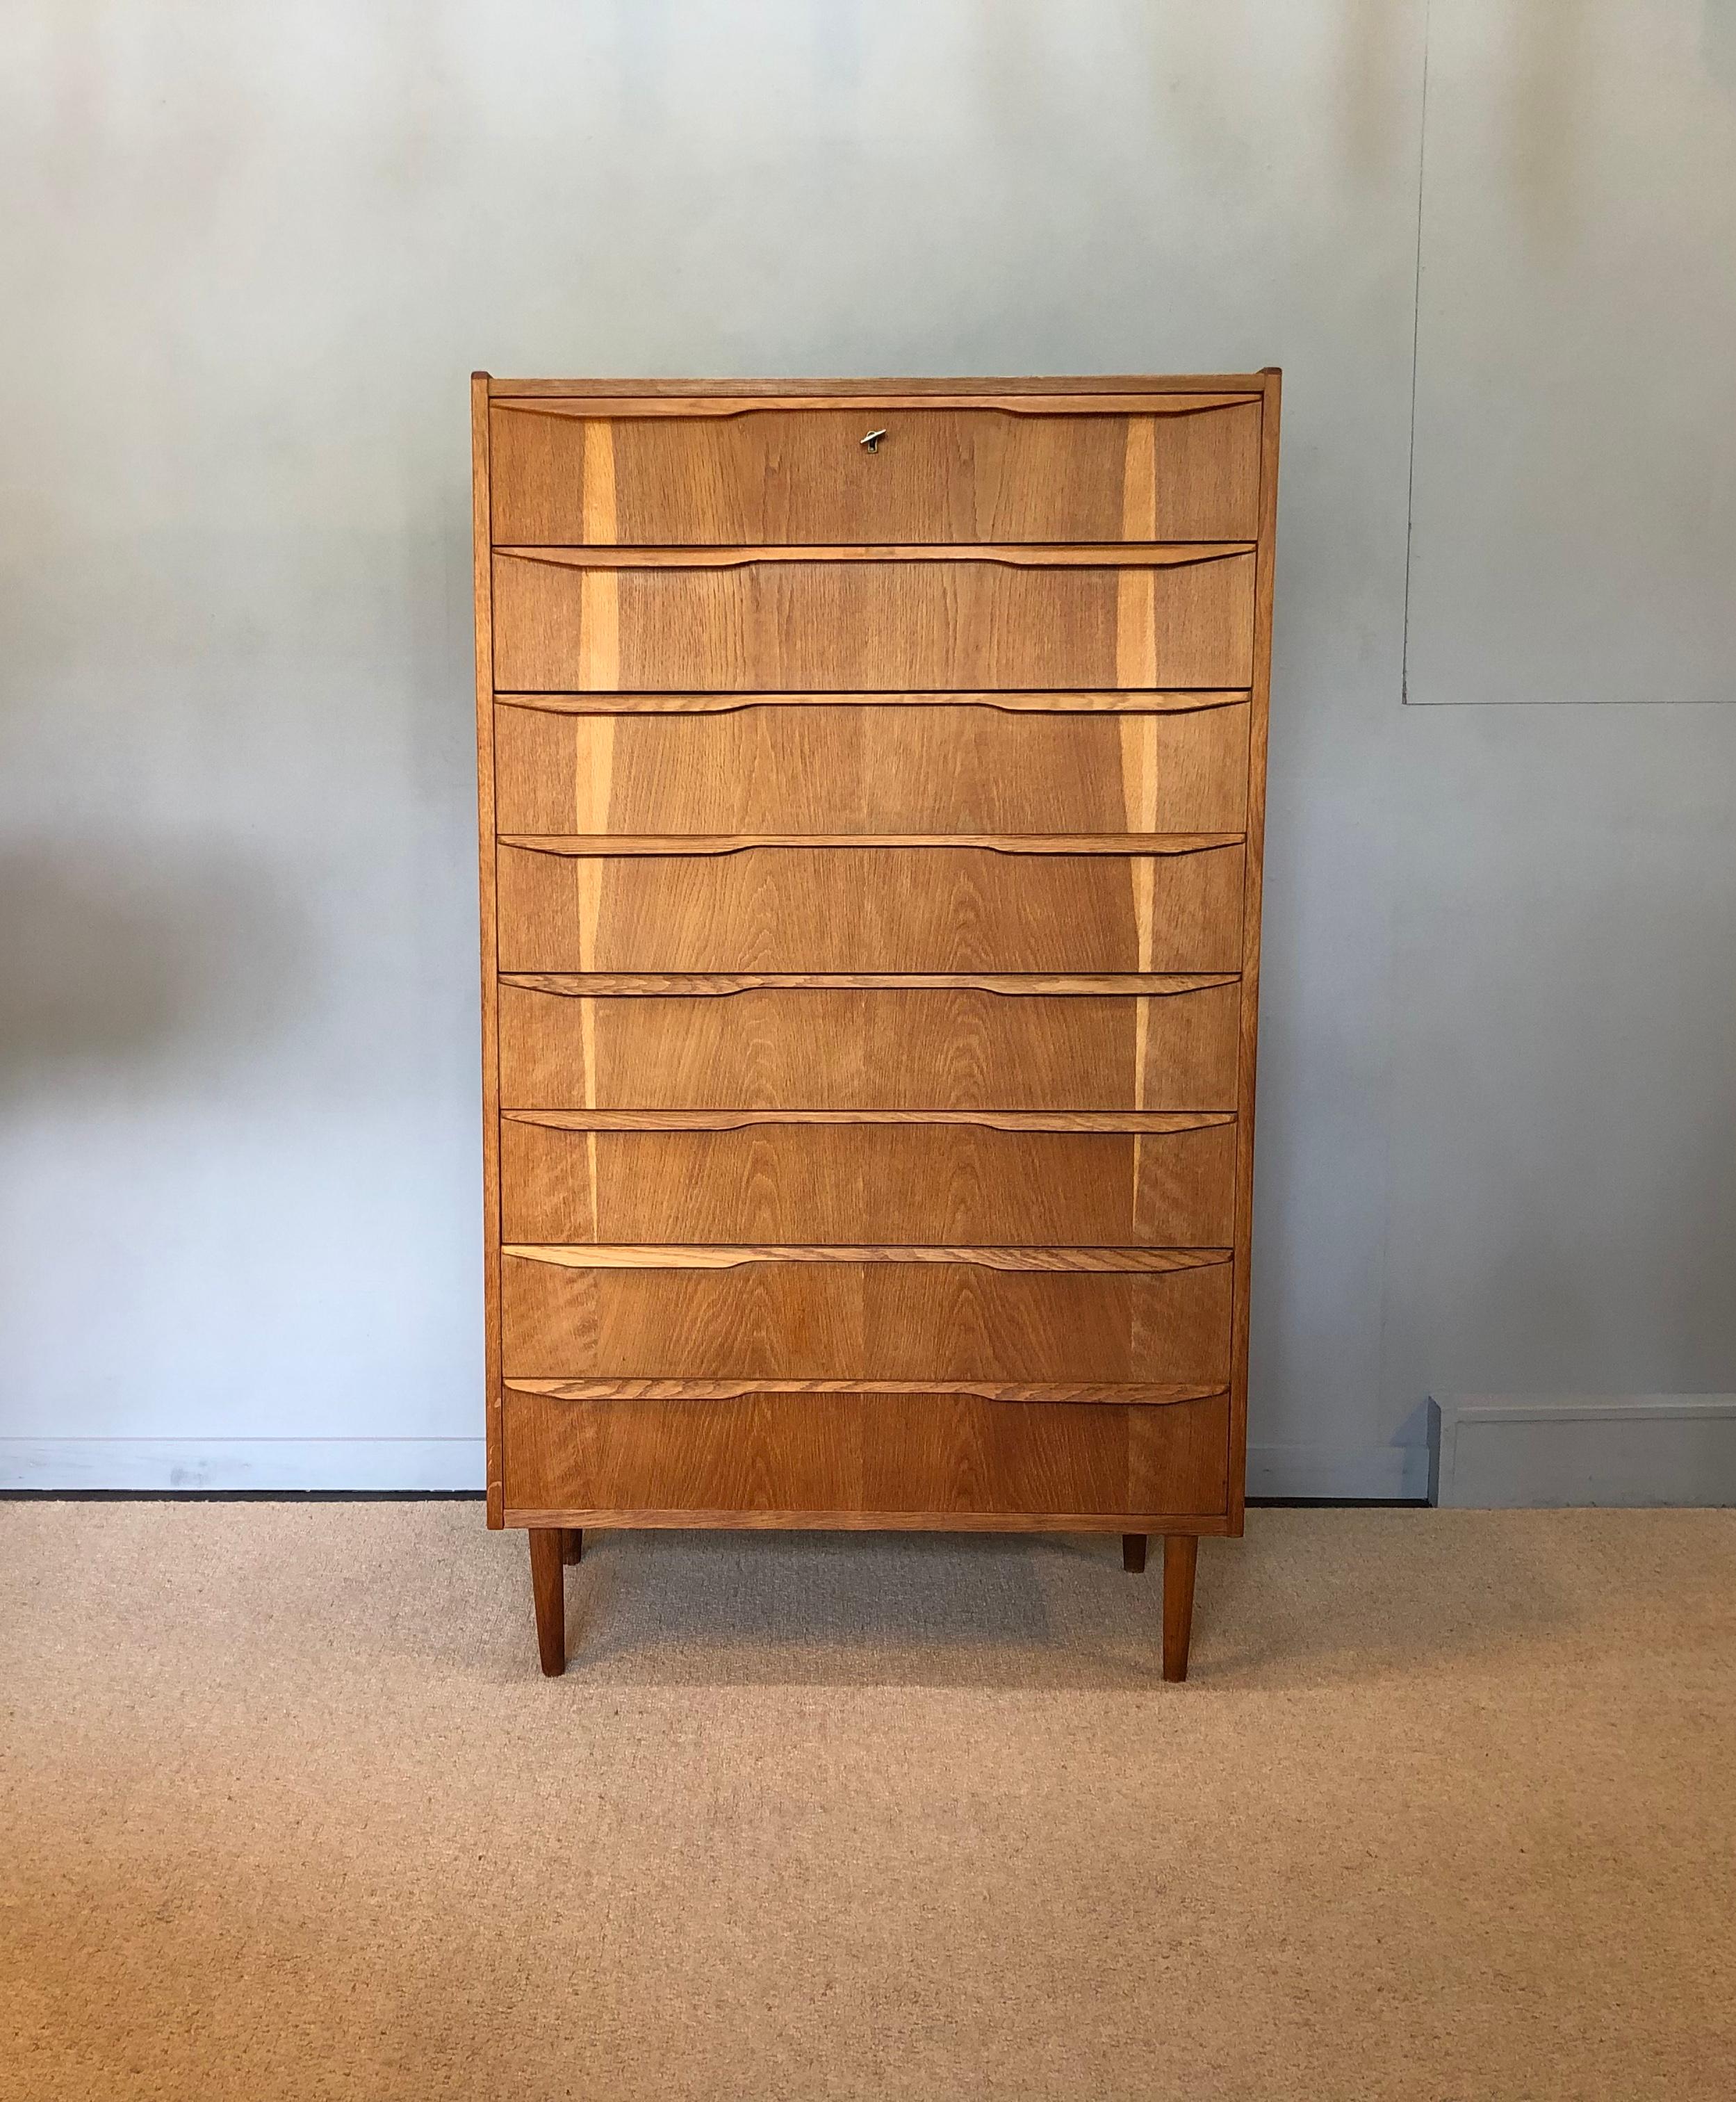 A superb large Danish midcentury oak tallboy. Produced in Denmark, circa 1960. Original key. Wonderful bookmatched oak front with sculpted lip handles. A great piece of Scandinavian modernist furniture.